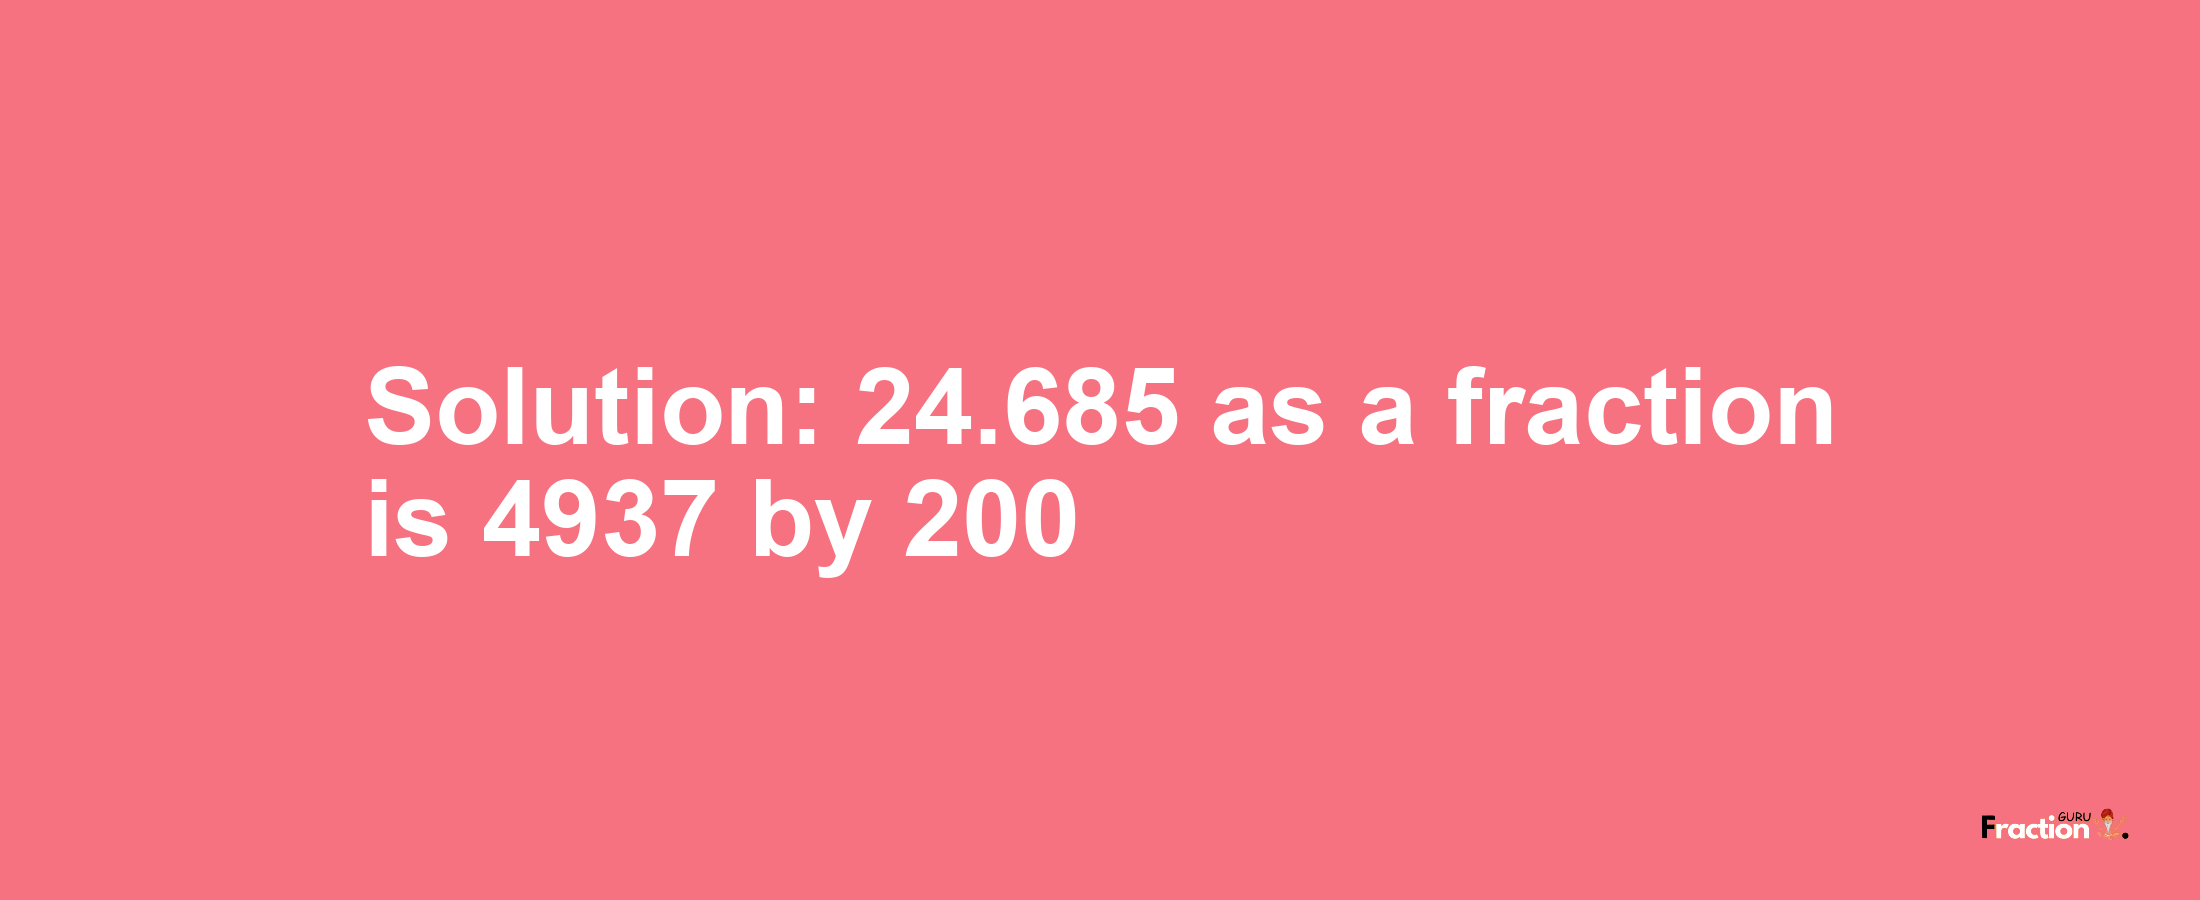 Solution:24.685 as a fraction is 4937/200